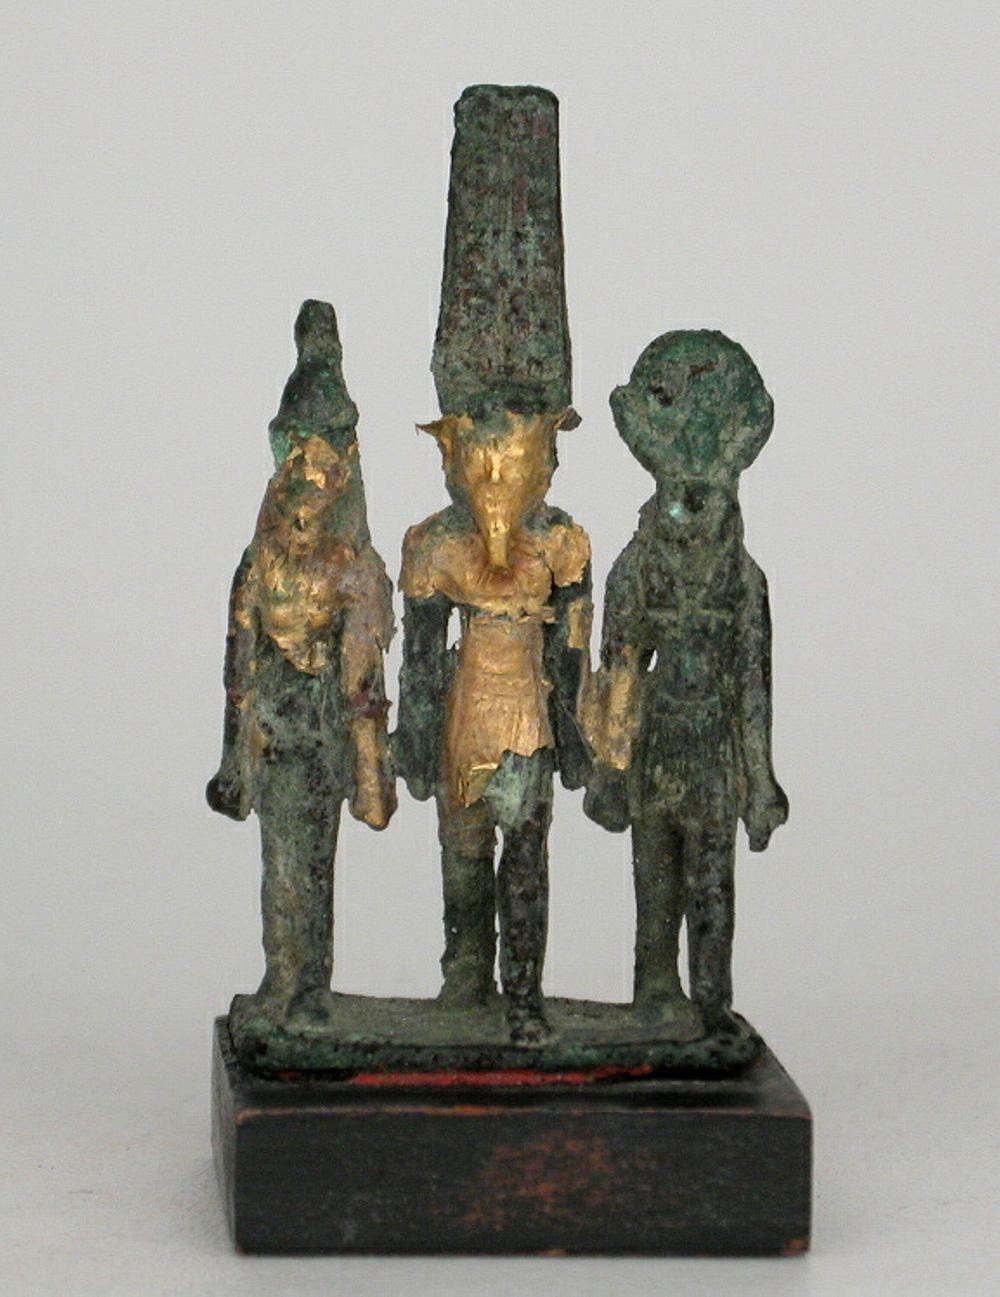 Statuette of the Theban Triad, Amun, Mut, and Khonsu by Ancient Egyptian